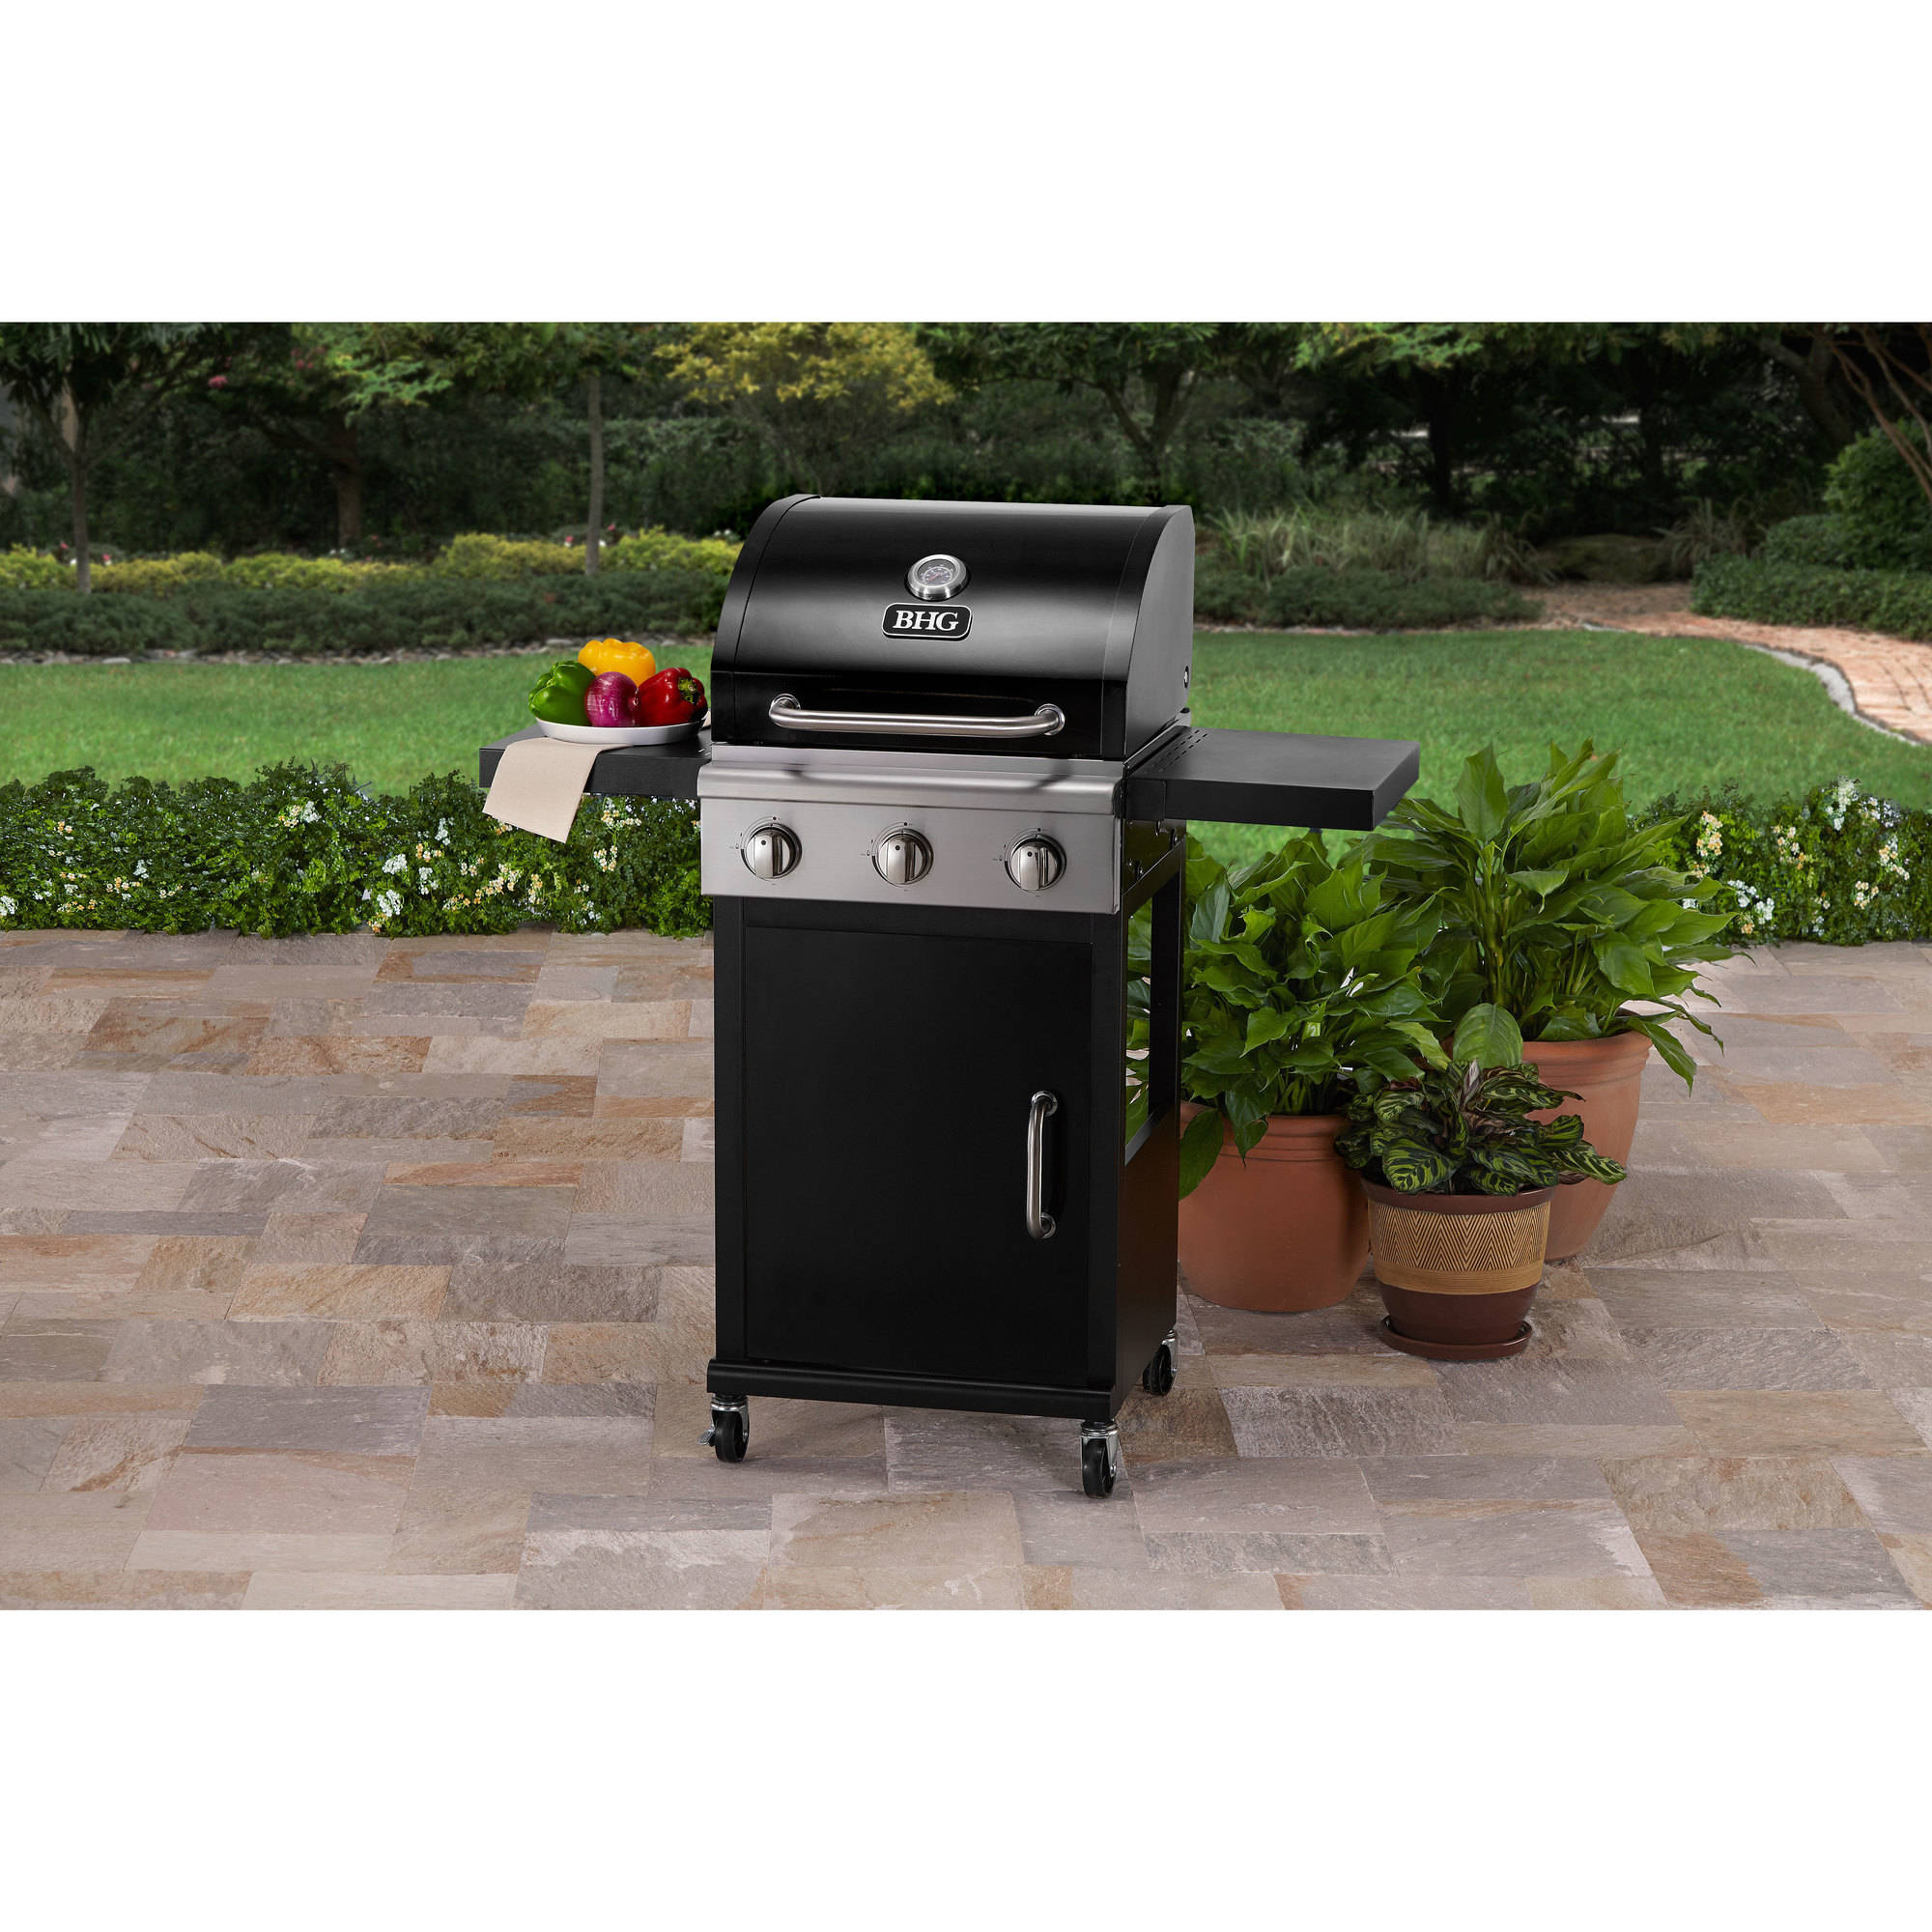 Better Homes and Gardens 3-Burner Gas Grill - image 4 of 7